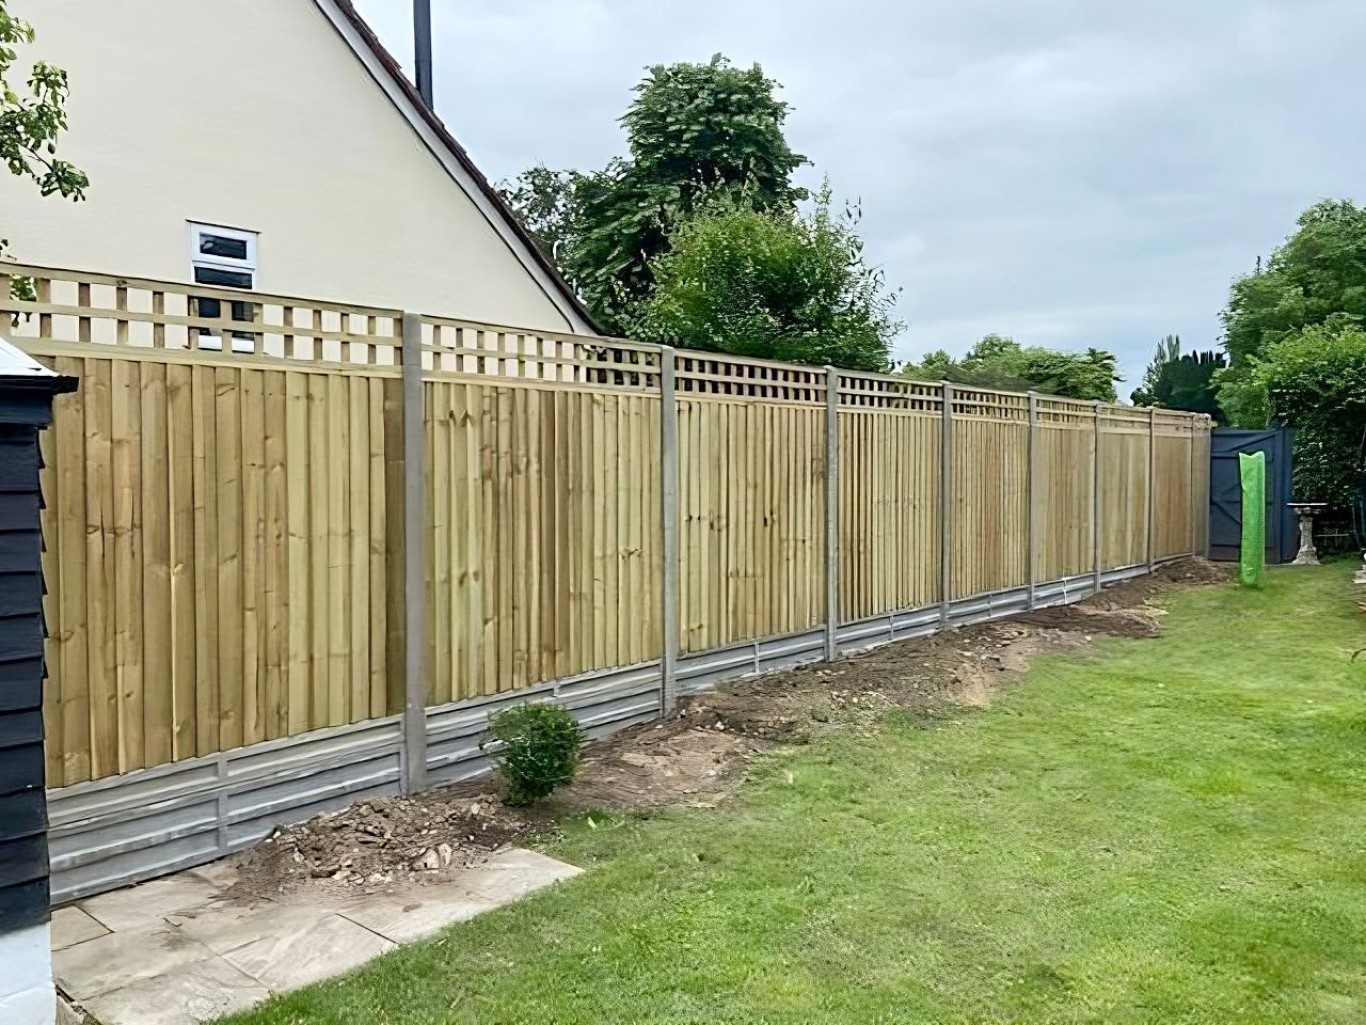 Closeboard fence with trellis on top.